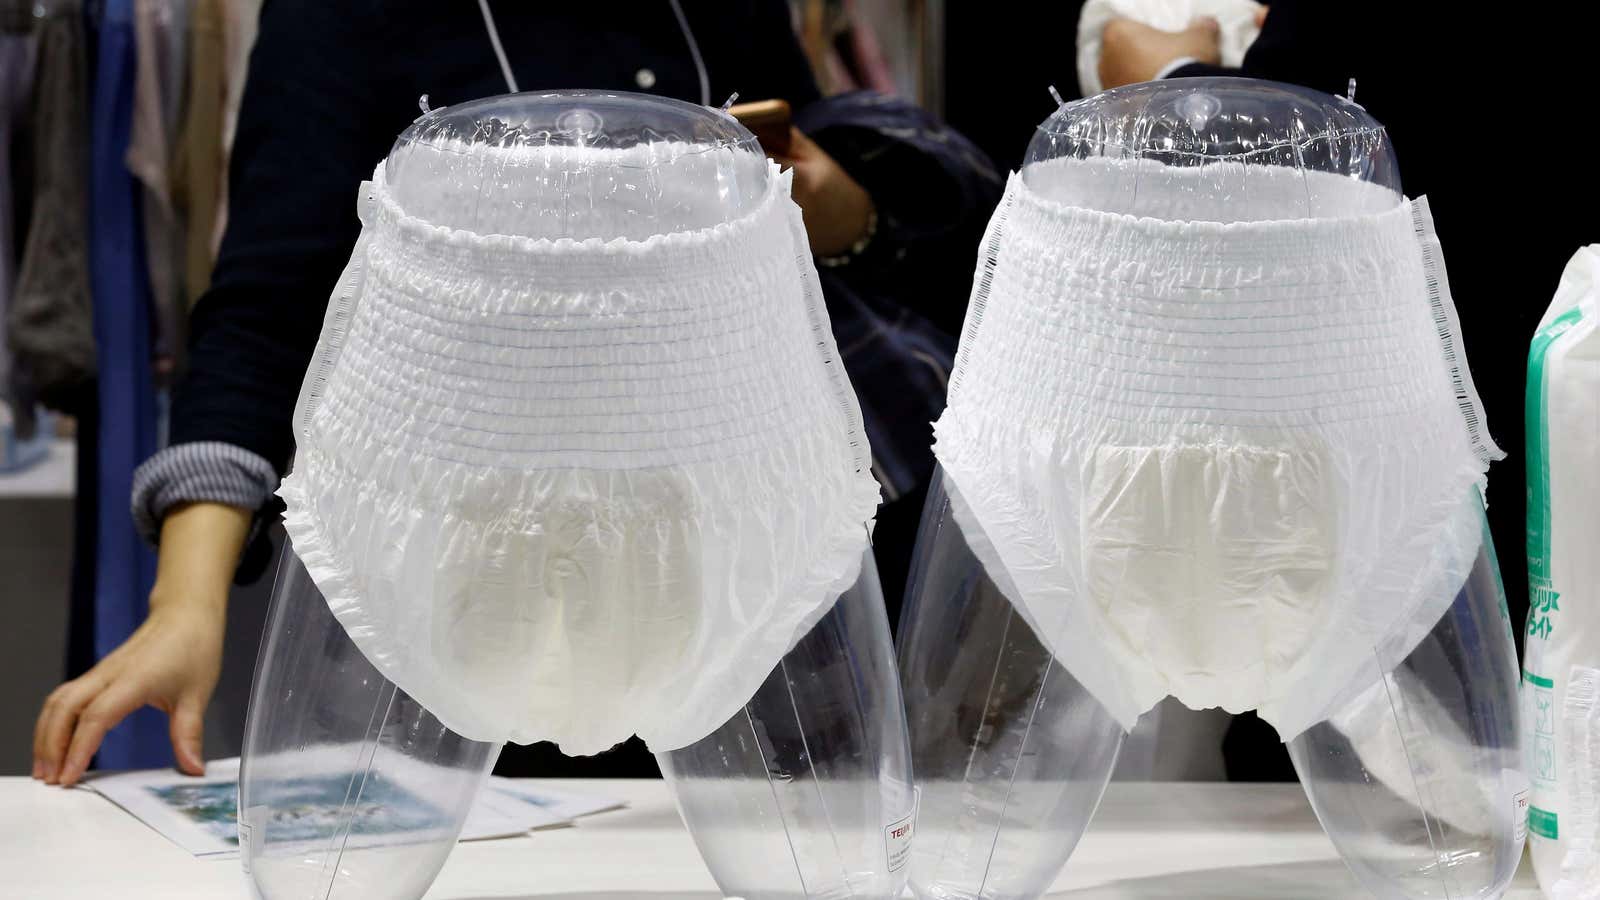 The next big innovation in aging Japan: flushable adult diapers